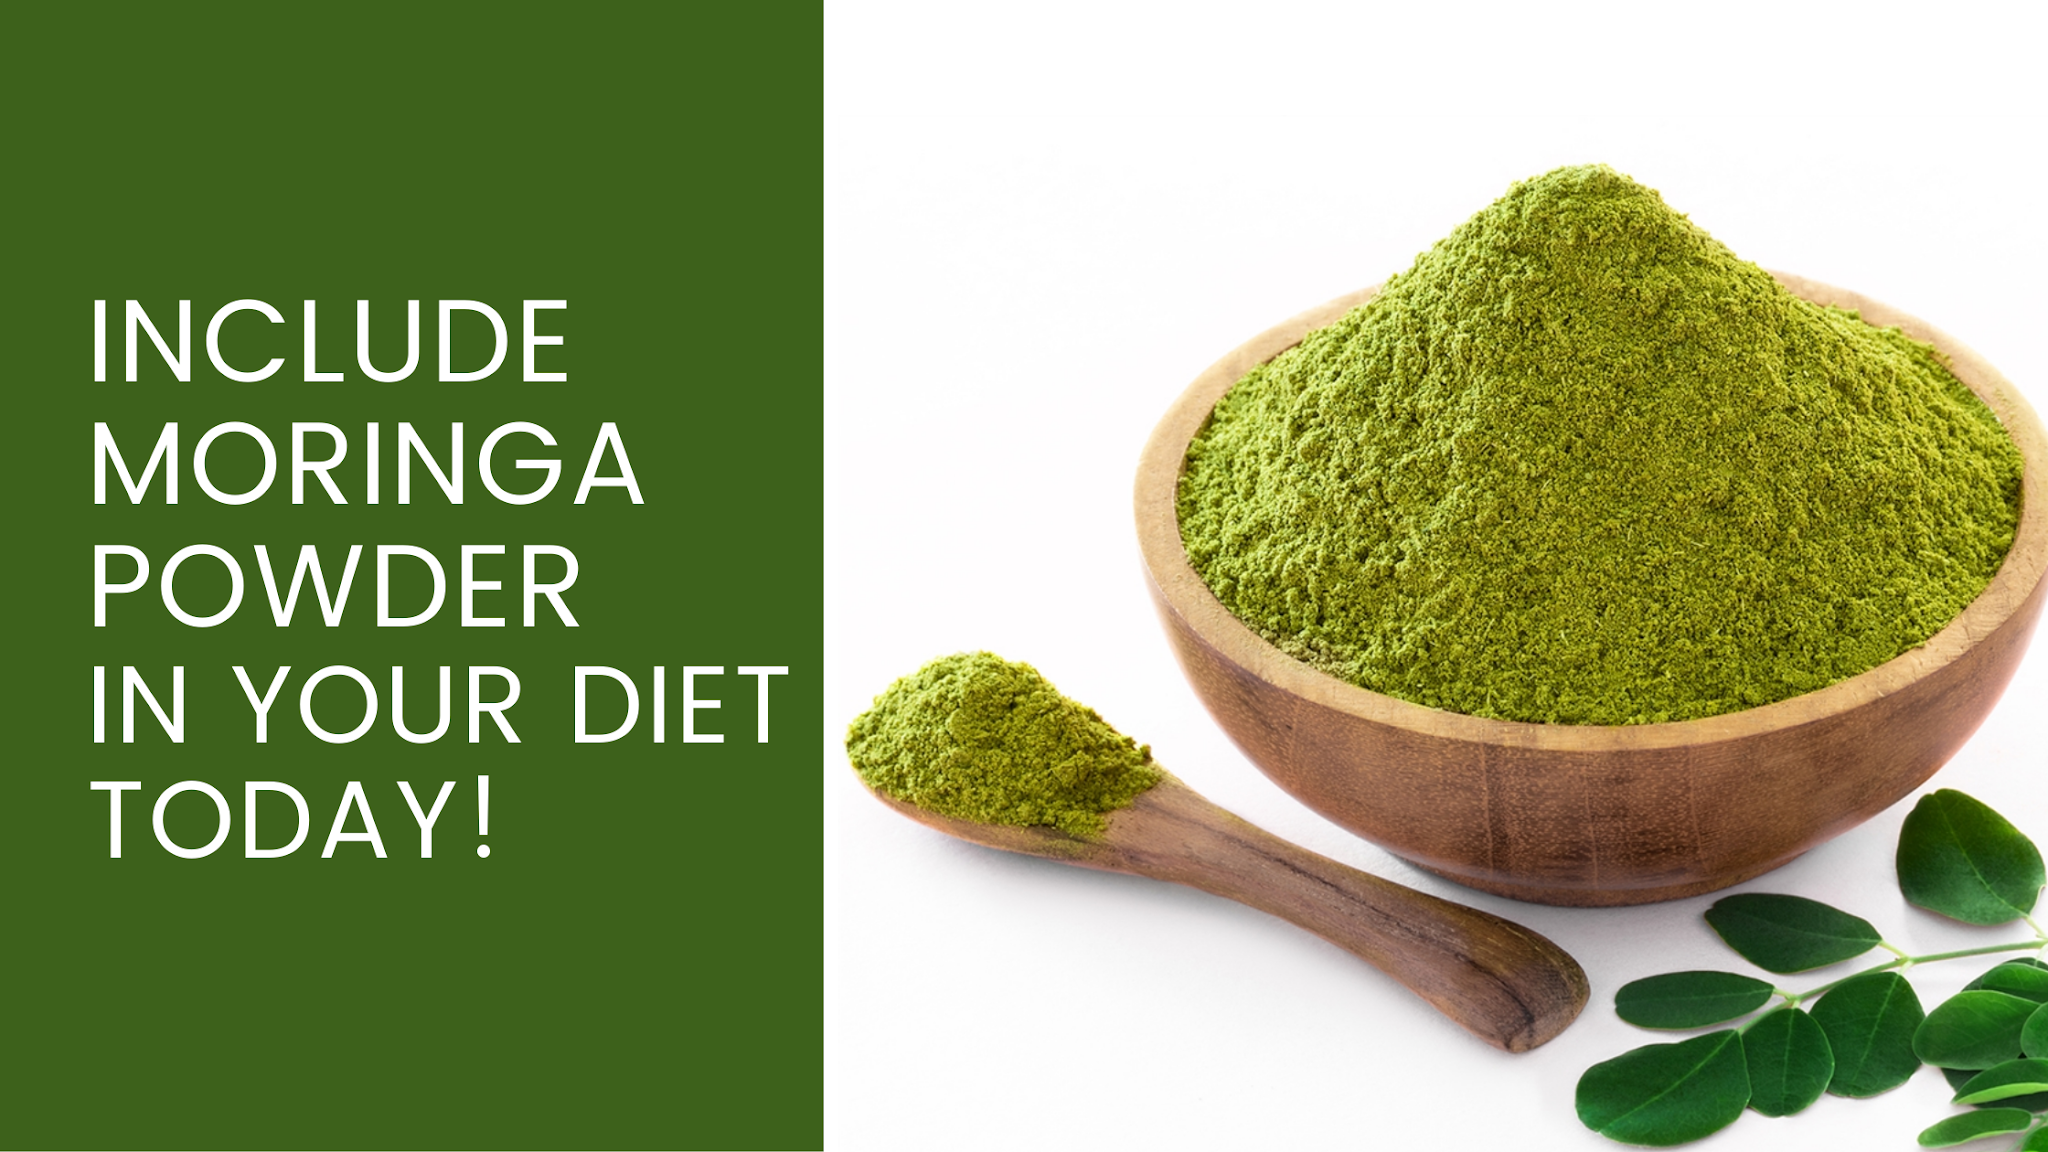 INCLUDE MORINGA POWDER IN YOUR DIET TODAY!